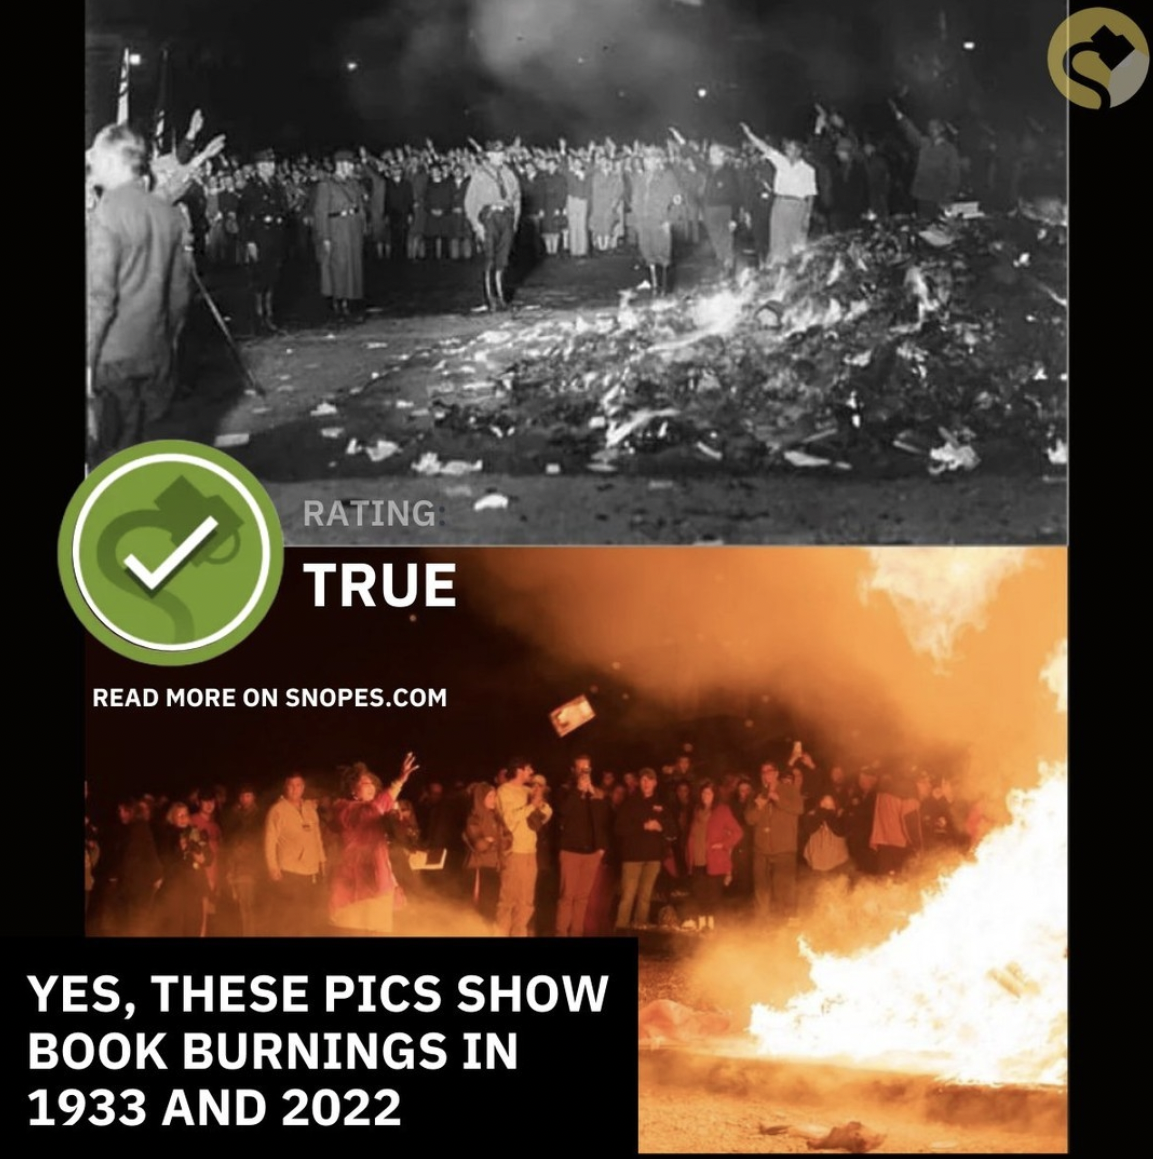 Snopes Facts - book burning 2022 - Rating True Read More On Snopes.Com Yes, These Pics Show Book Burnings In 1933 And 2022